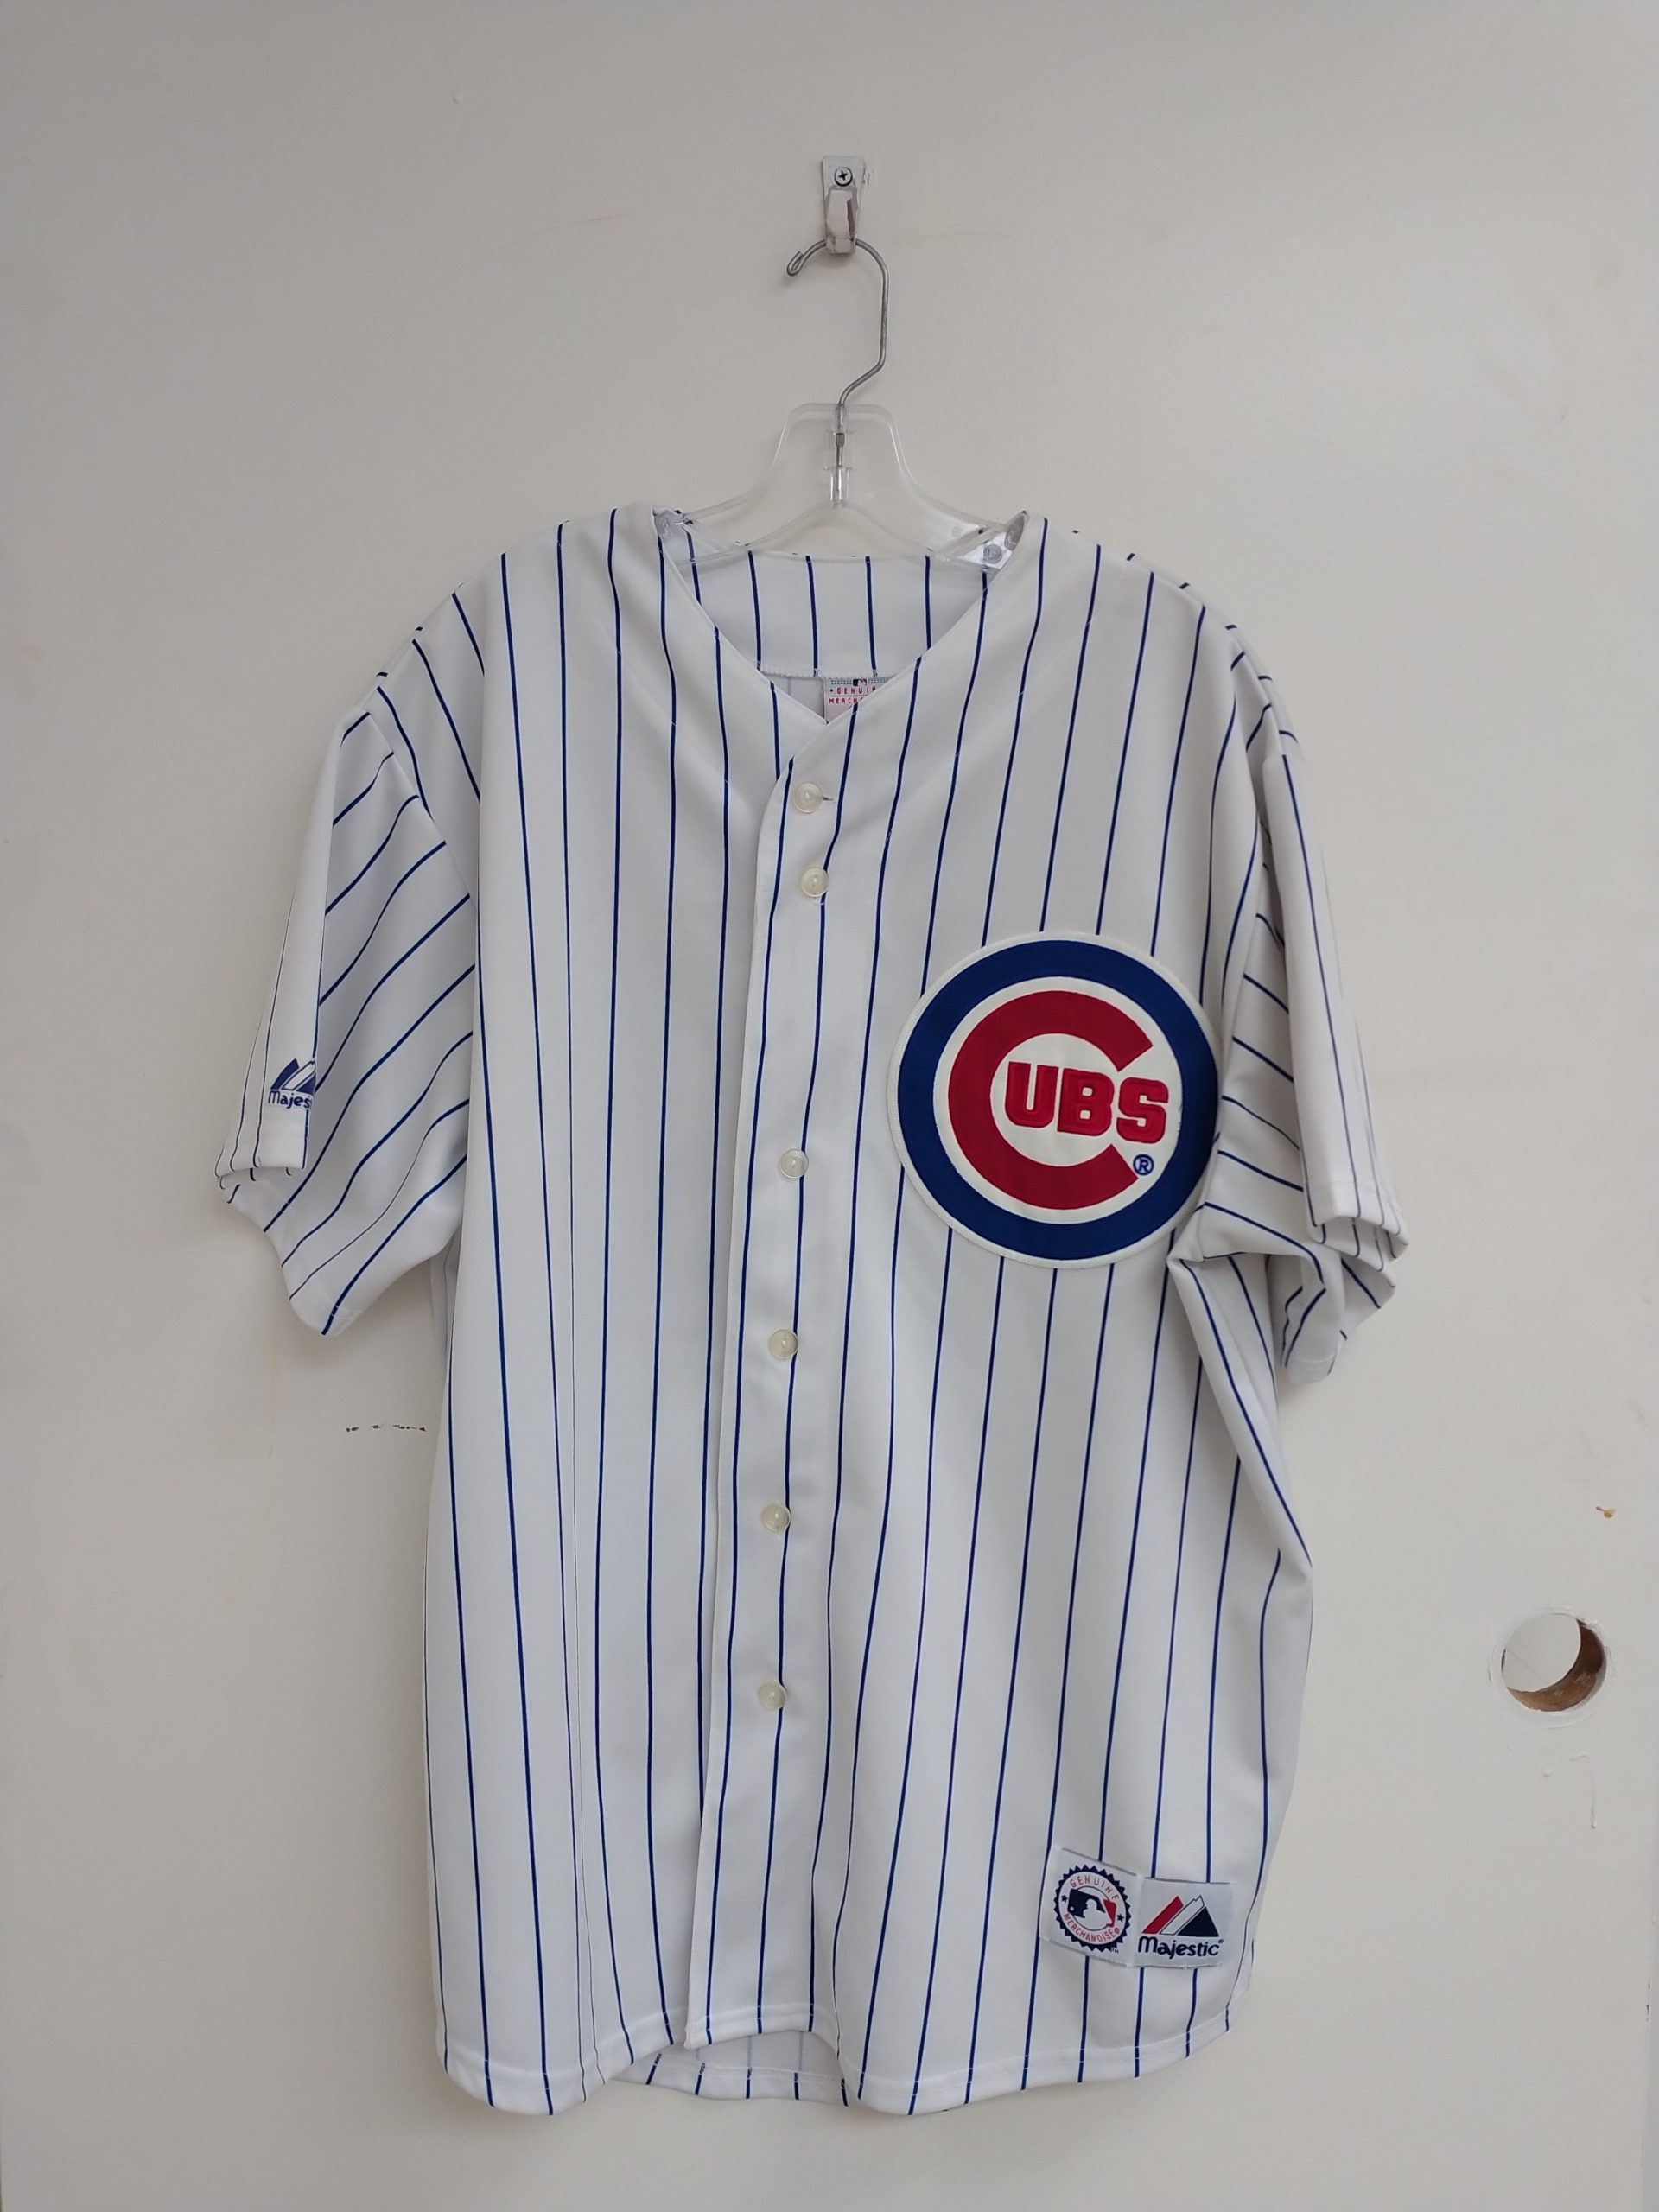 chicago cubs jerseys through the years